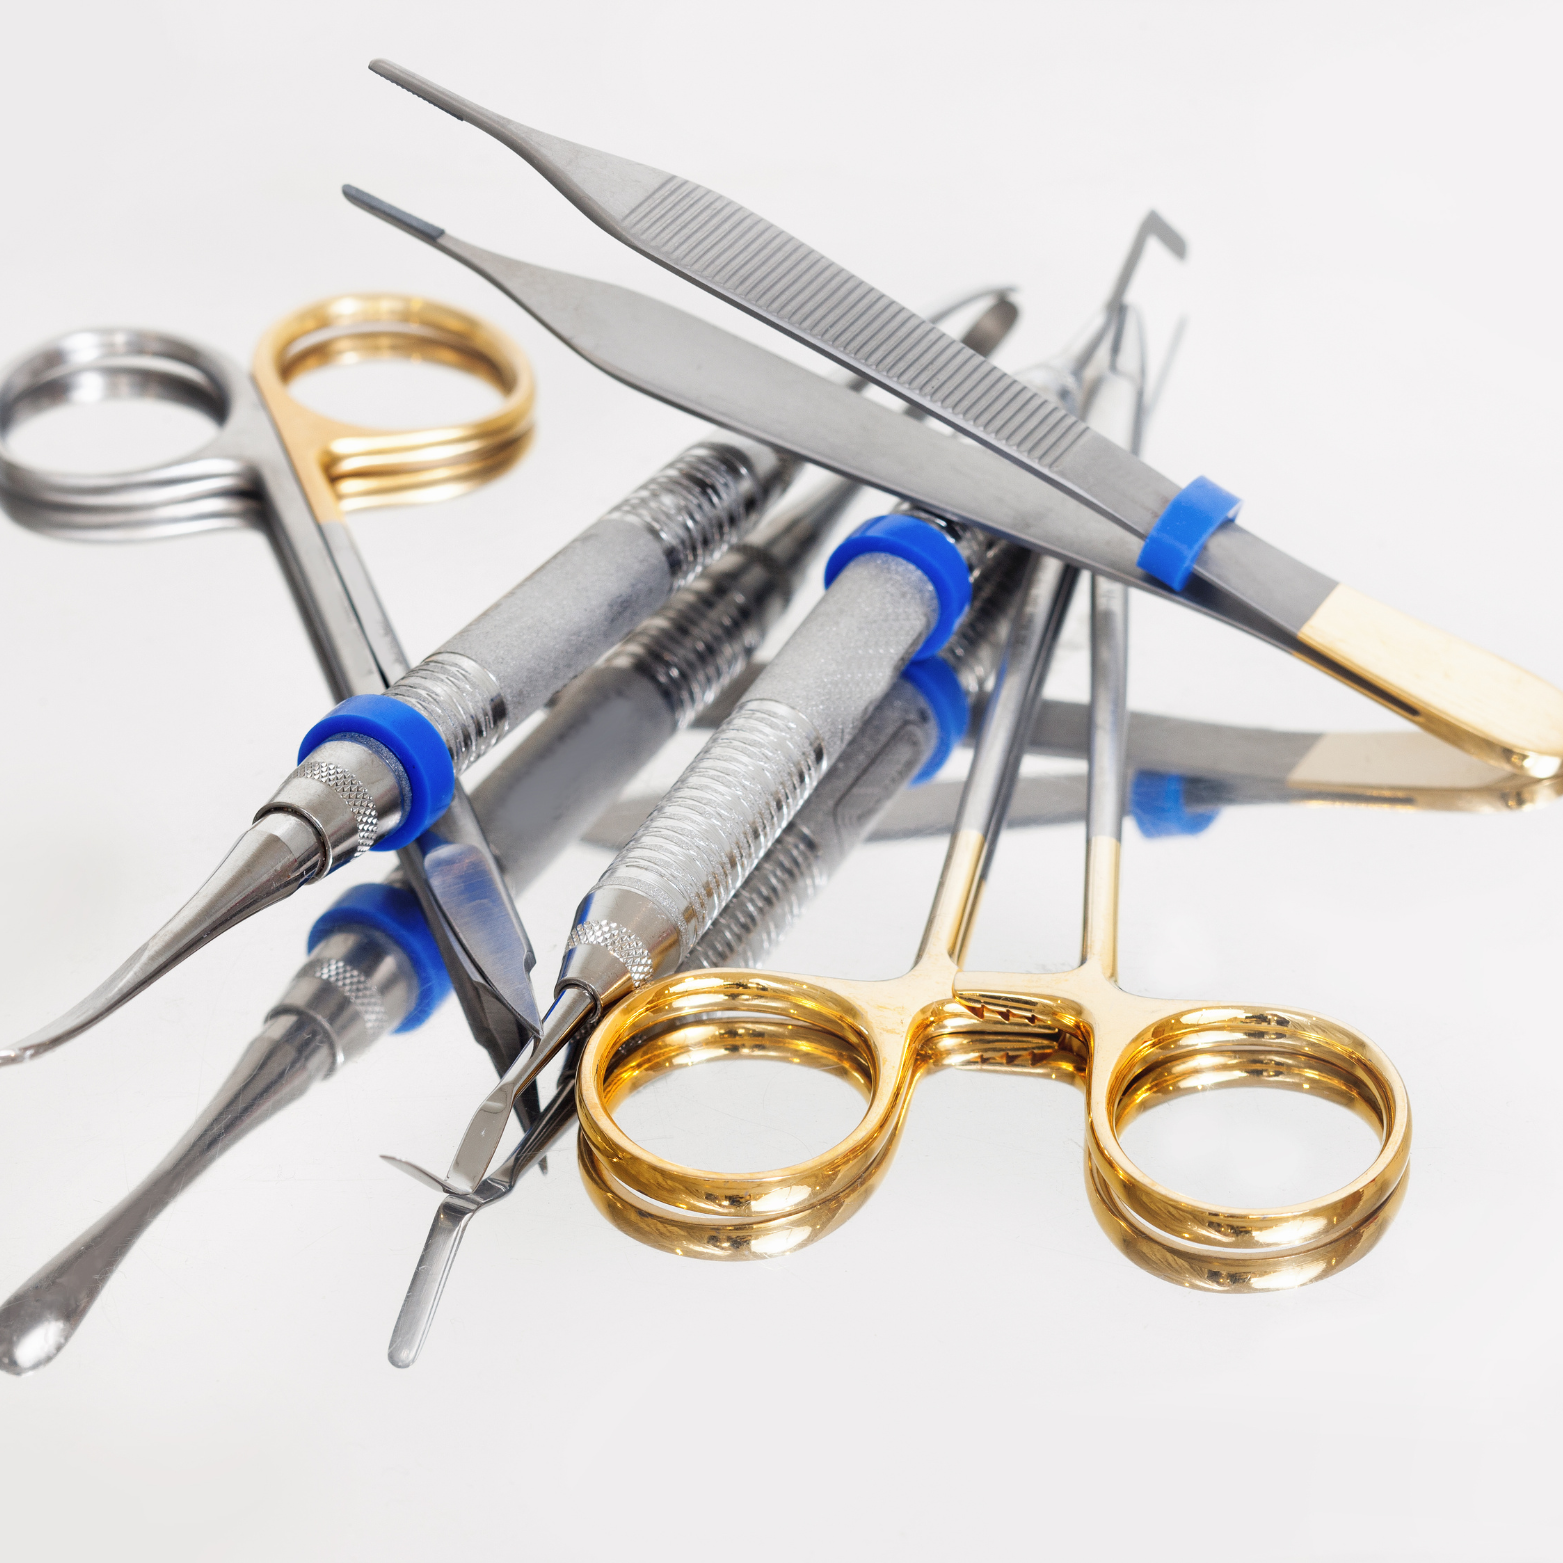 Electroplating on plastics. Gold medical tools. Gold is used on medical tools as it is hypoallergenic and more sanitary than most other metals.